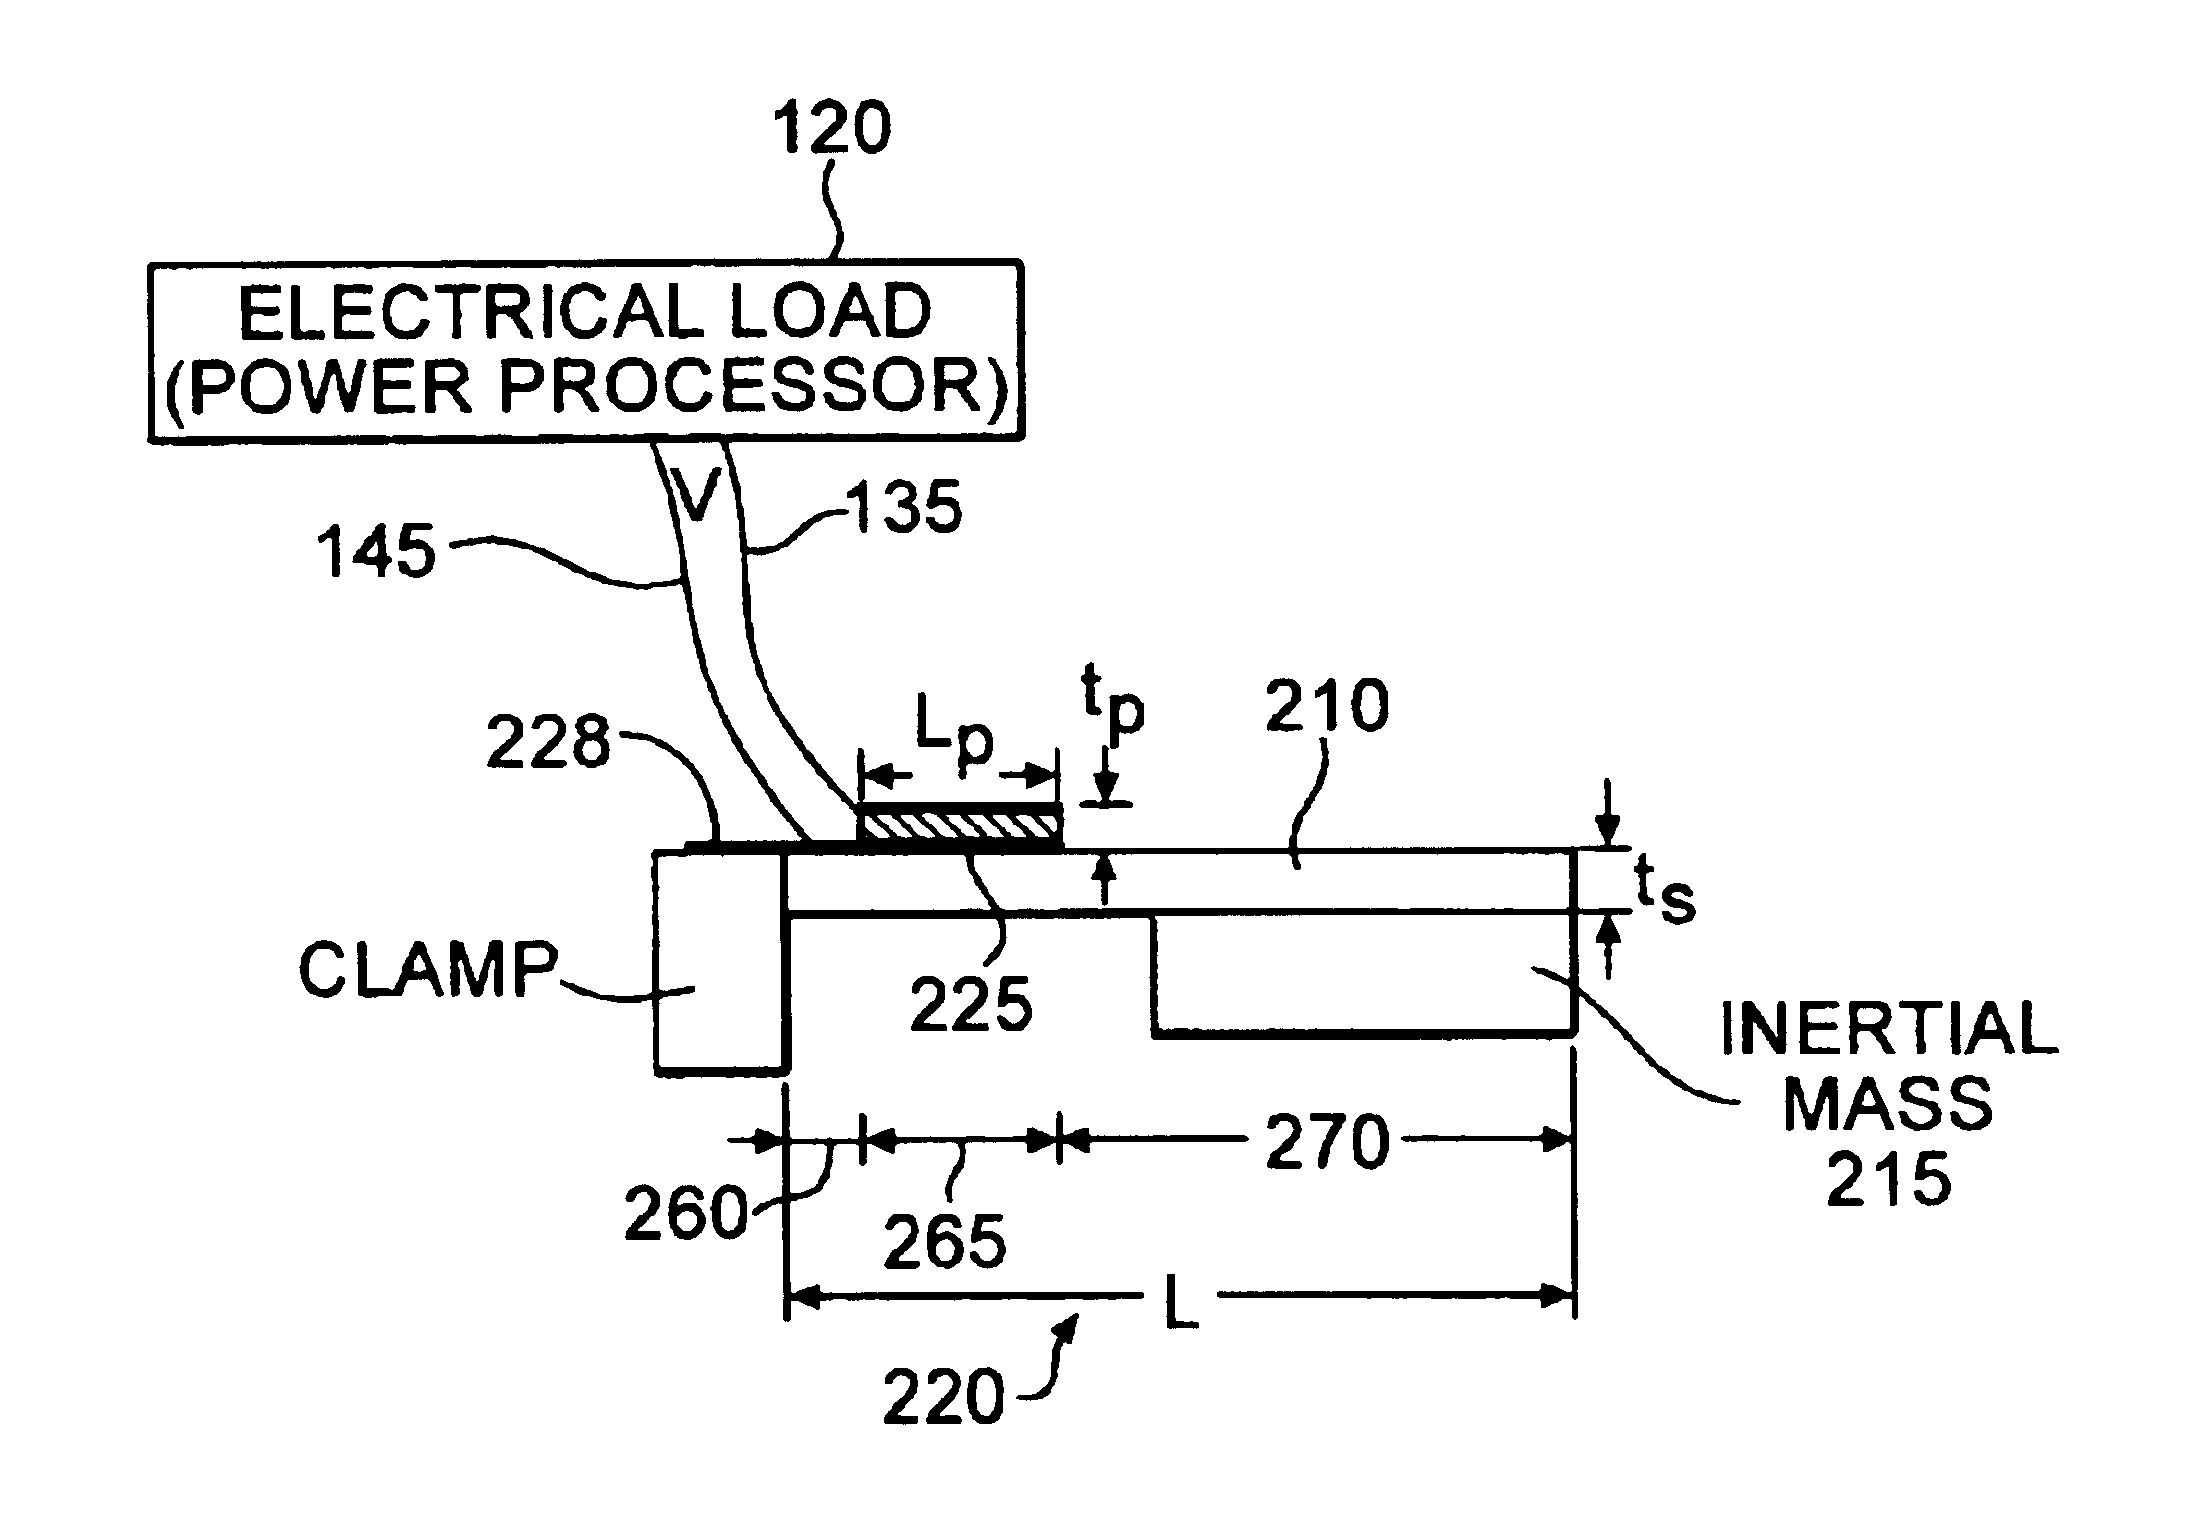 Resonant energy MEMS array and system including dynamically modifiable power processor